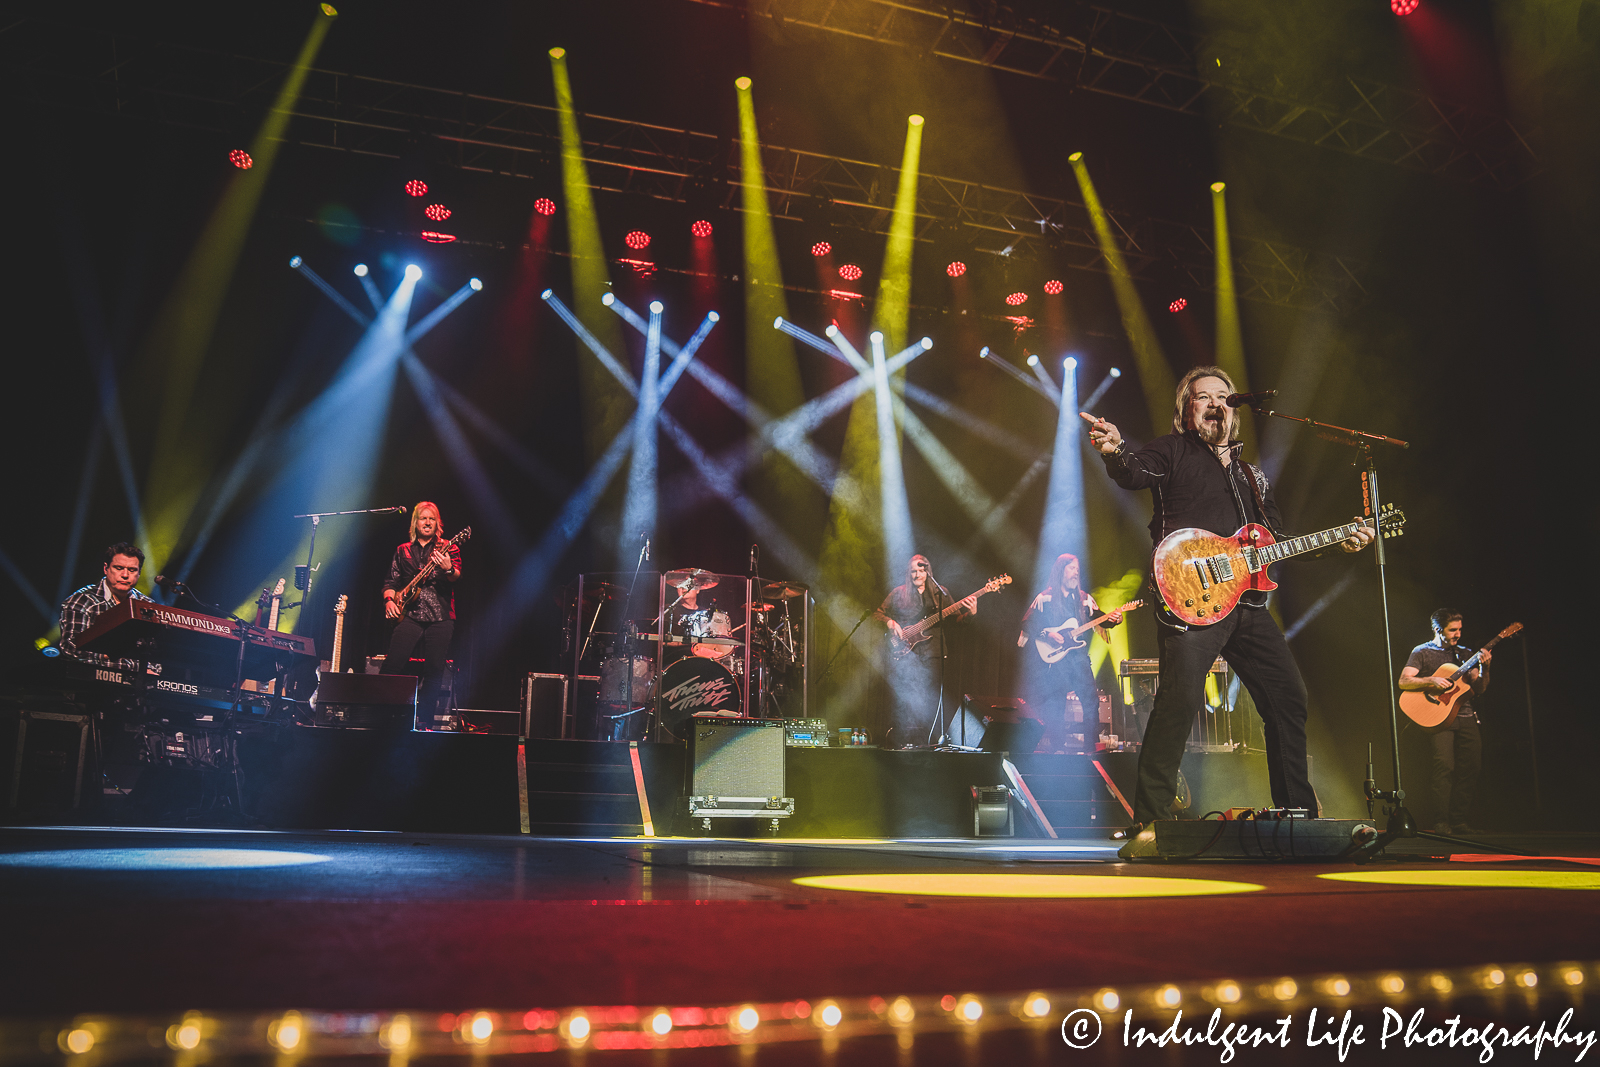 Travis Tritt performing "Put Some Drive in Your Country" at Ameristar Casino in Kansas City, MO on December 10, 2022.